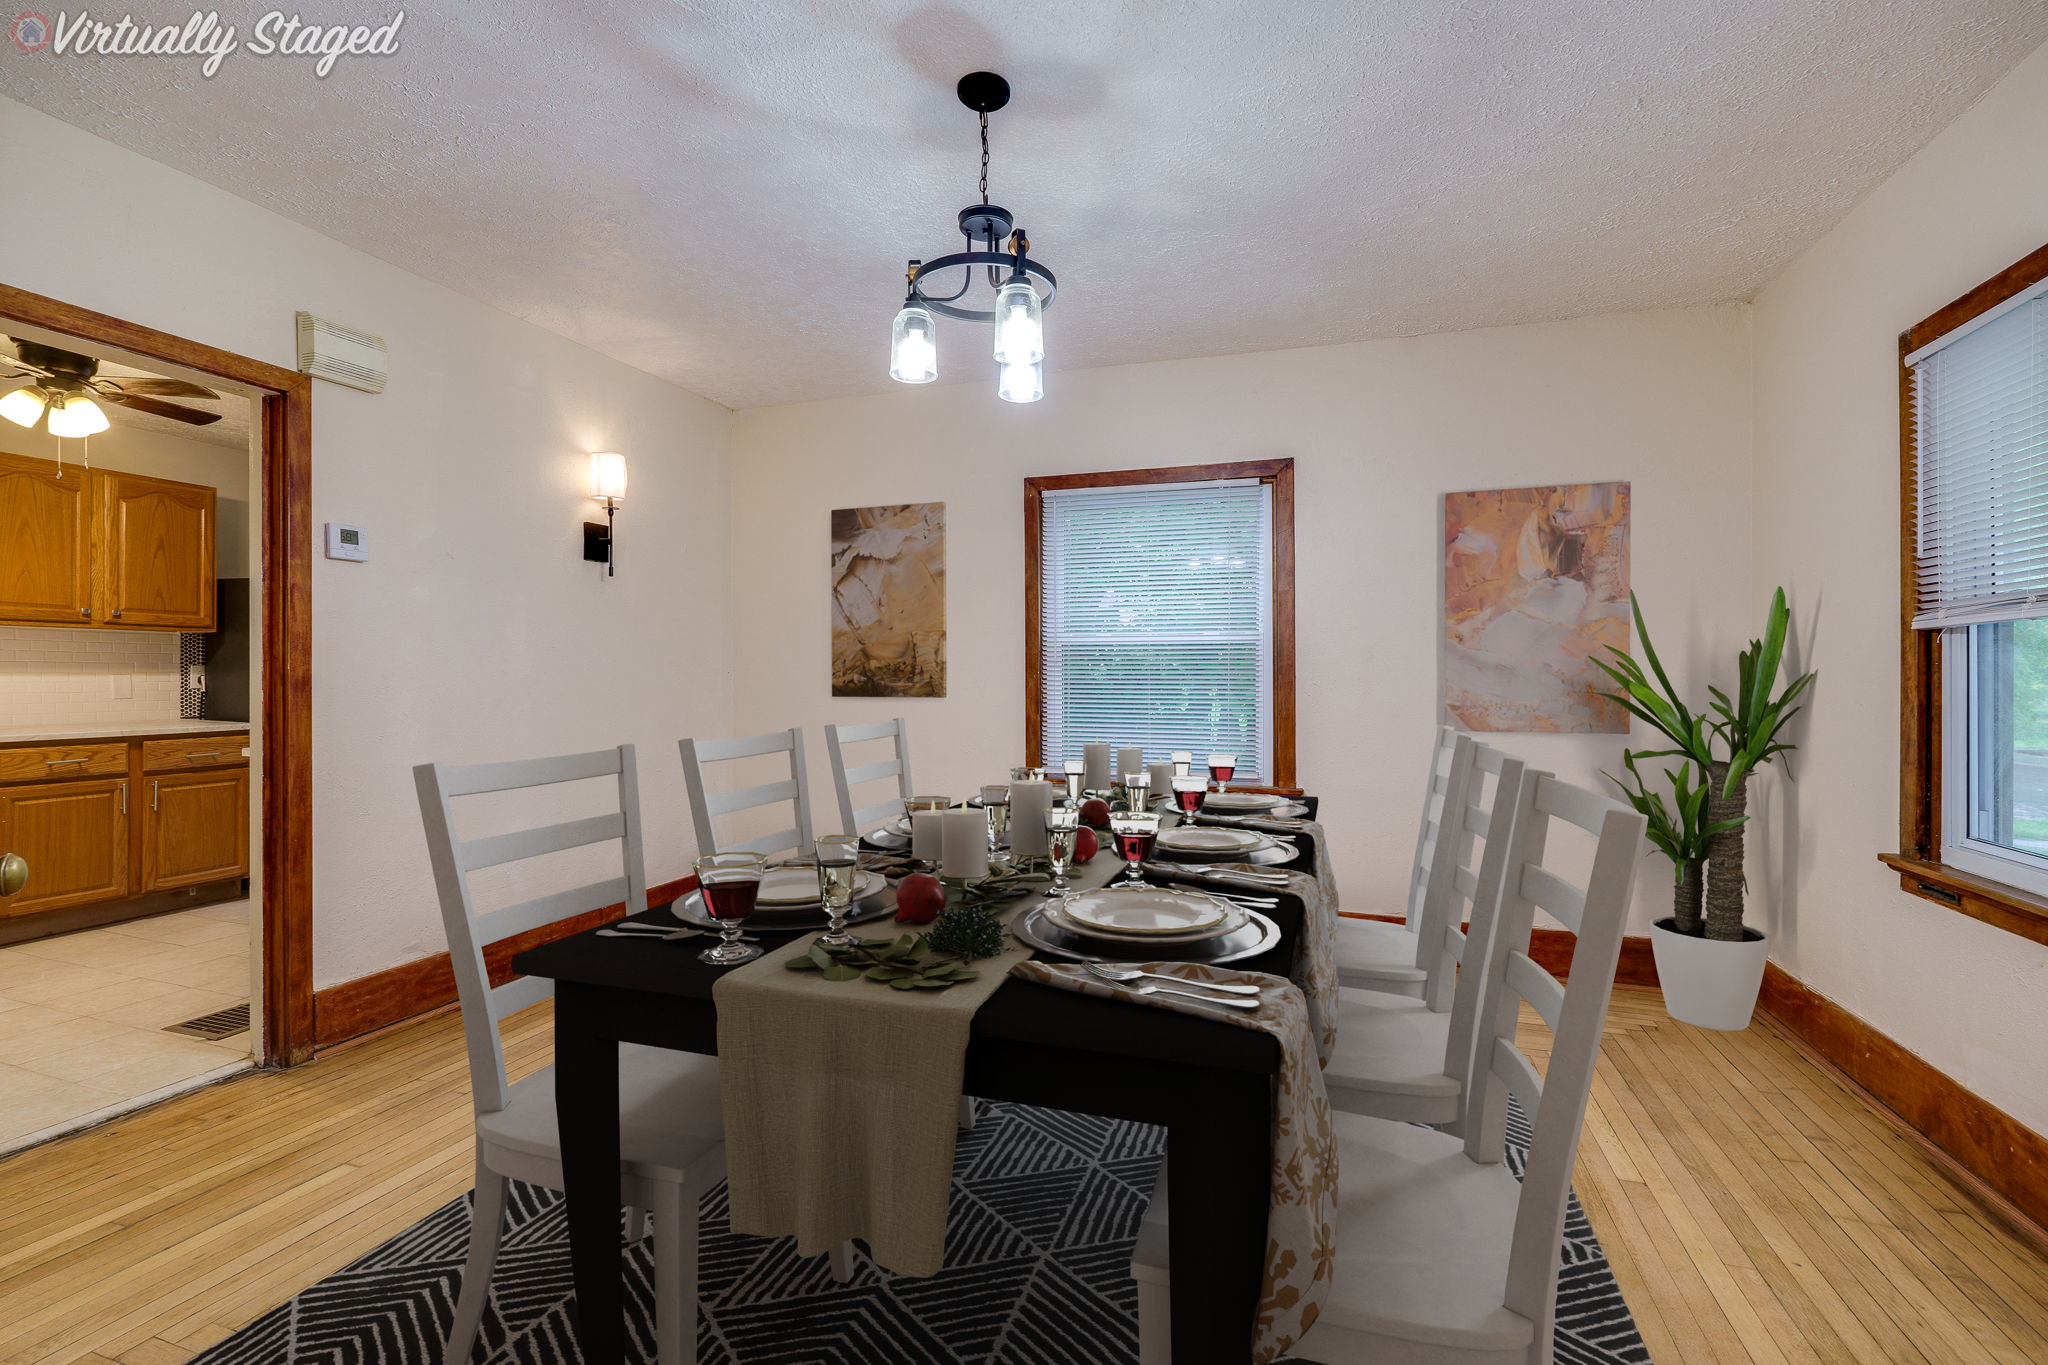 Virtually Staged Dining Space